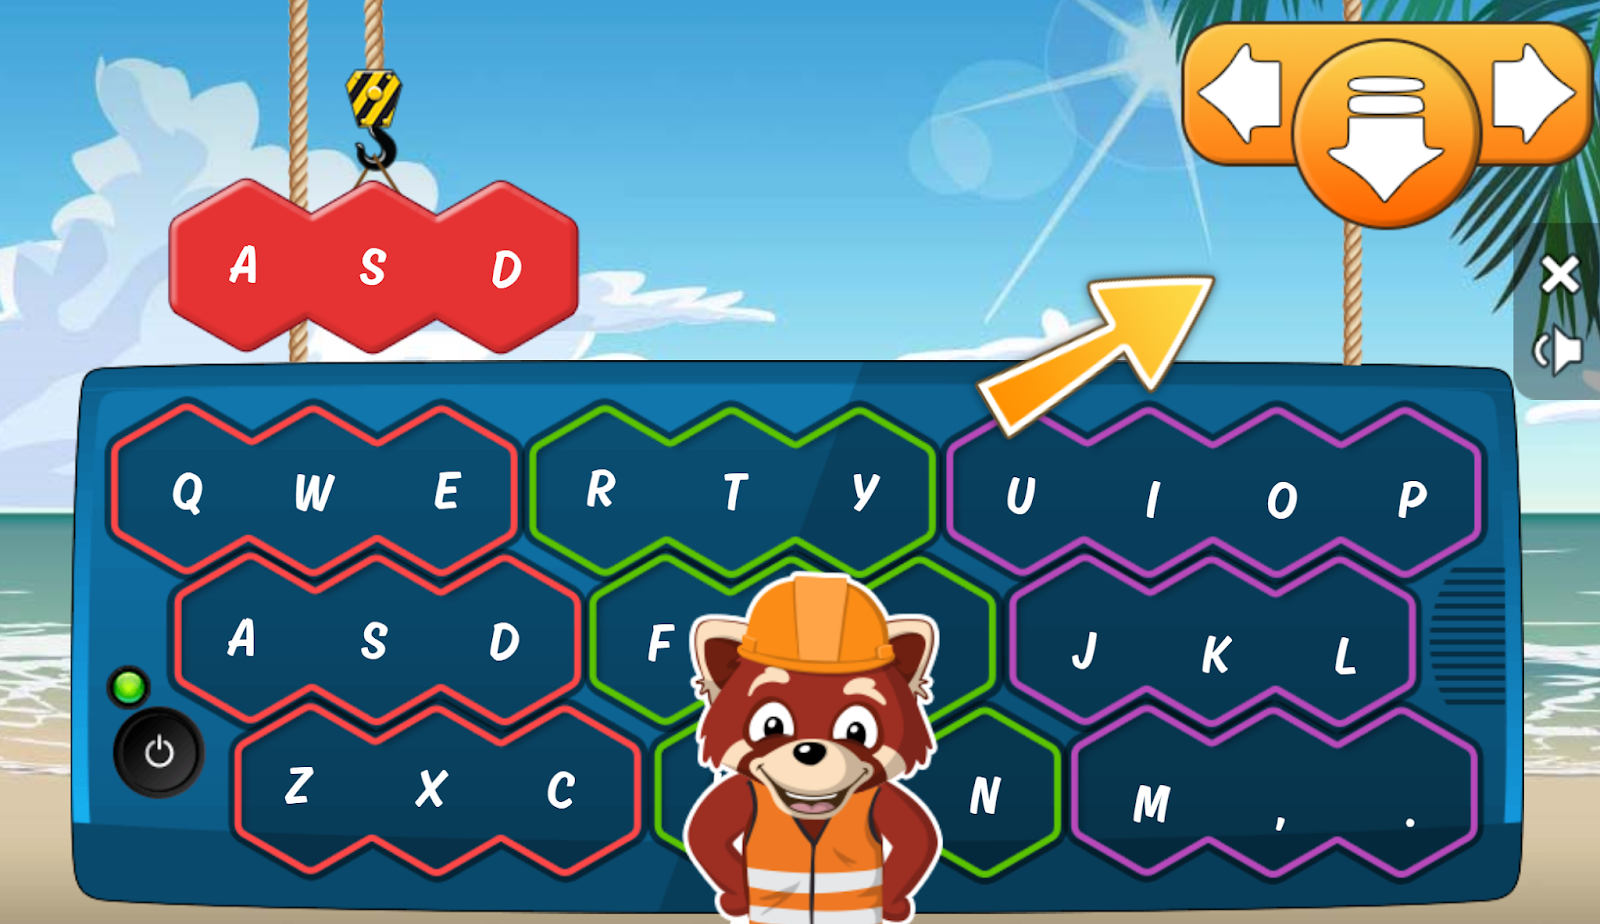 Free Typing Games For Kids All You Need Infos